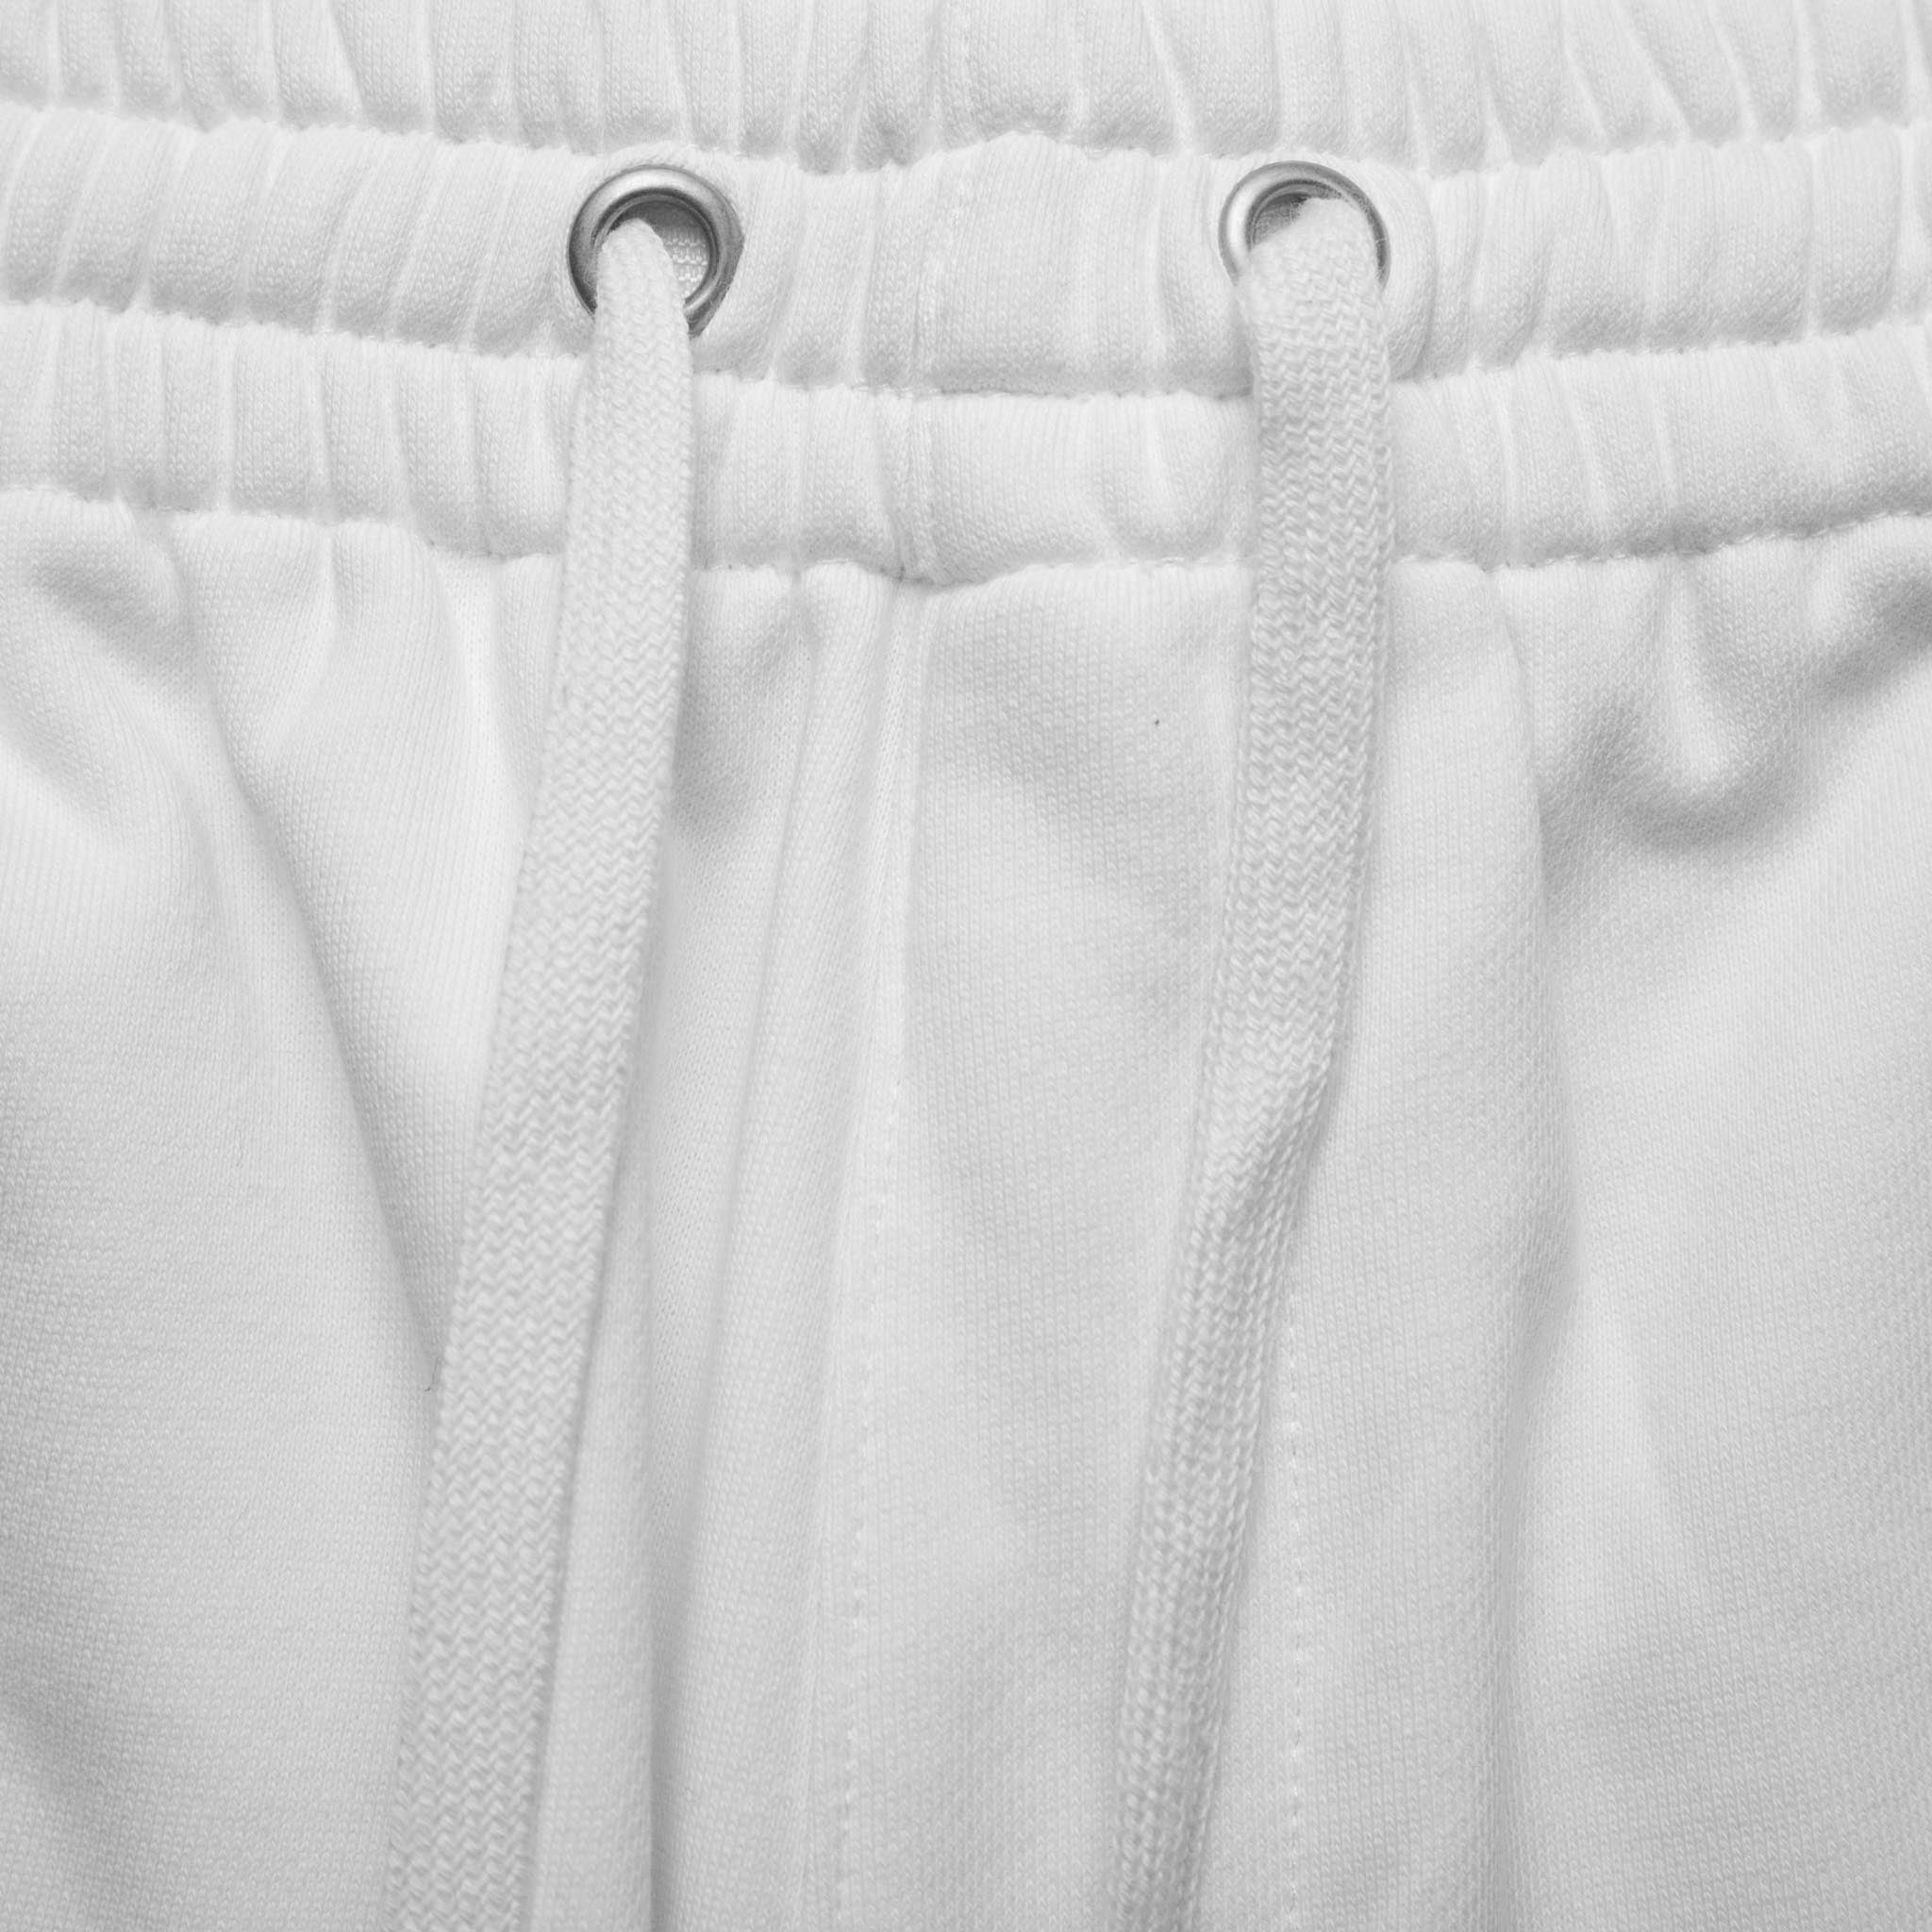 HOMME+ Rubber Patch Shorts White